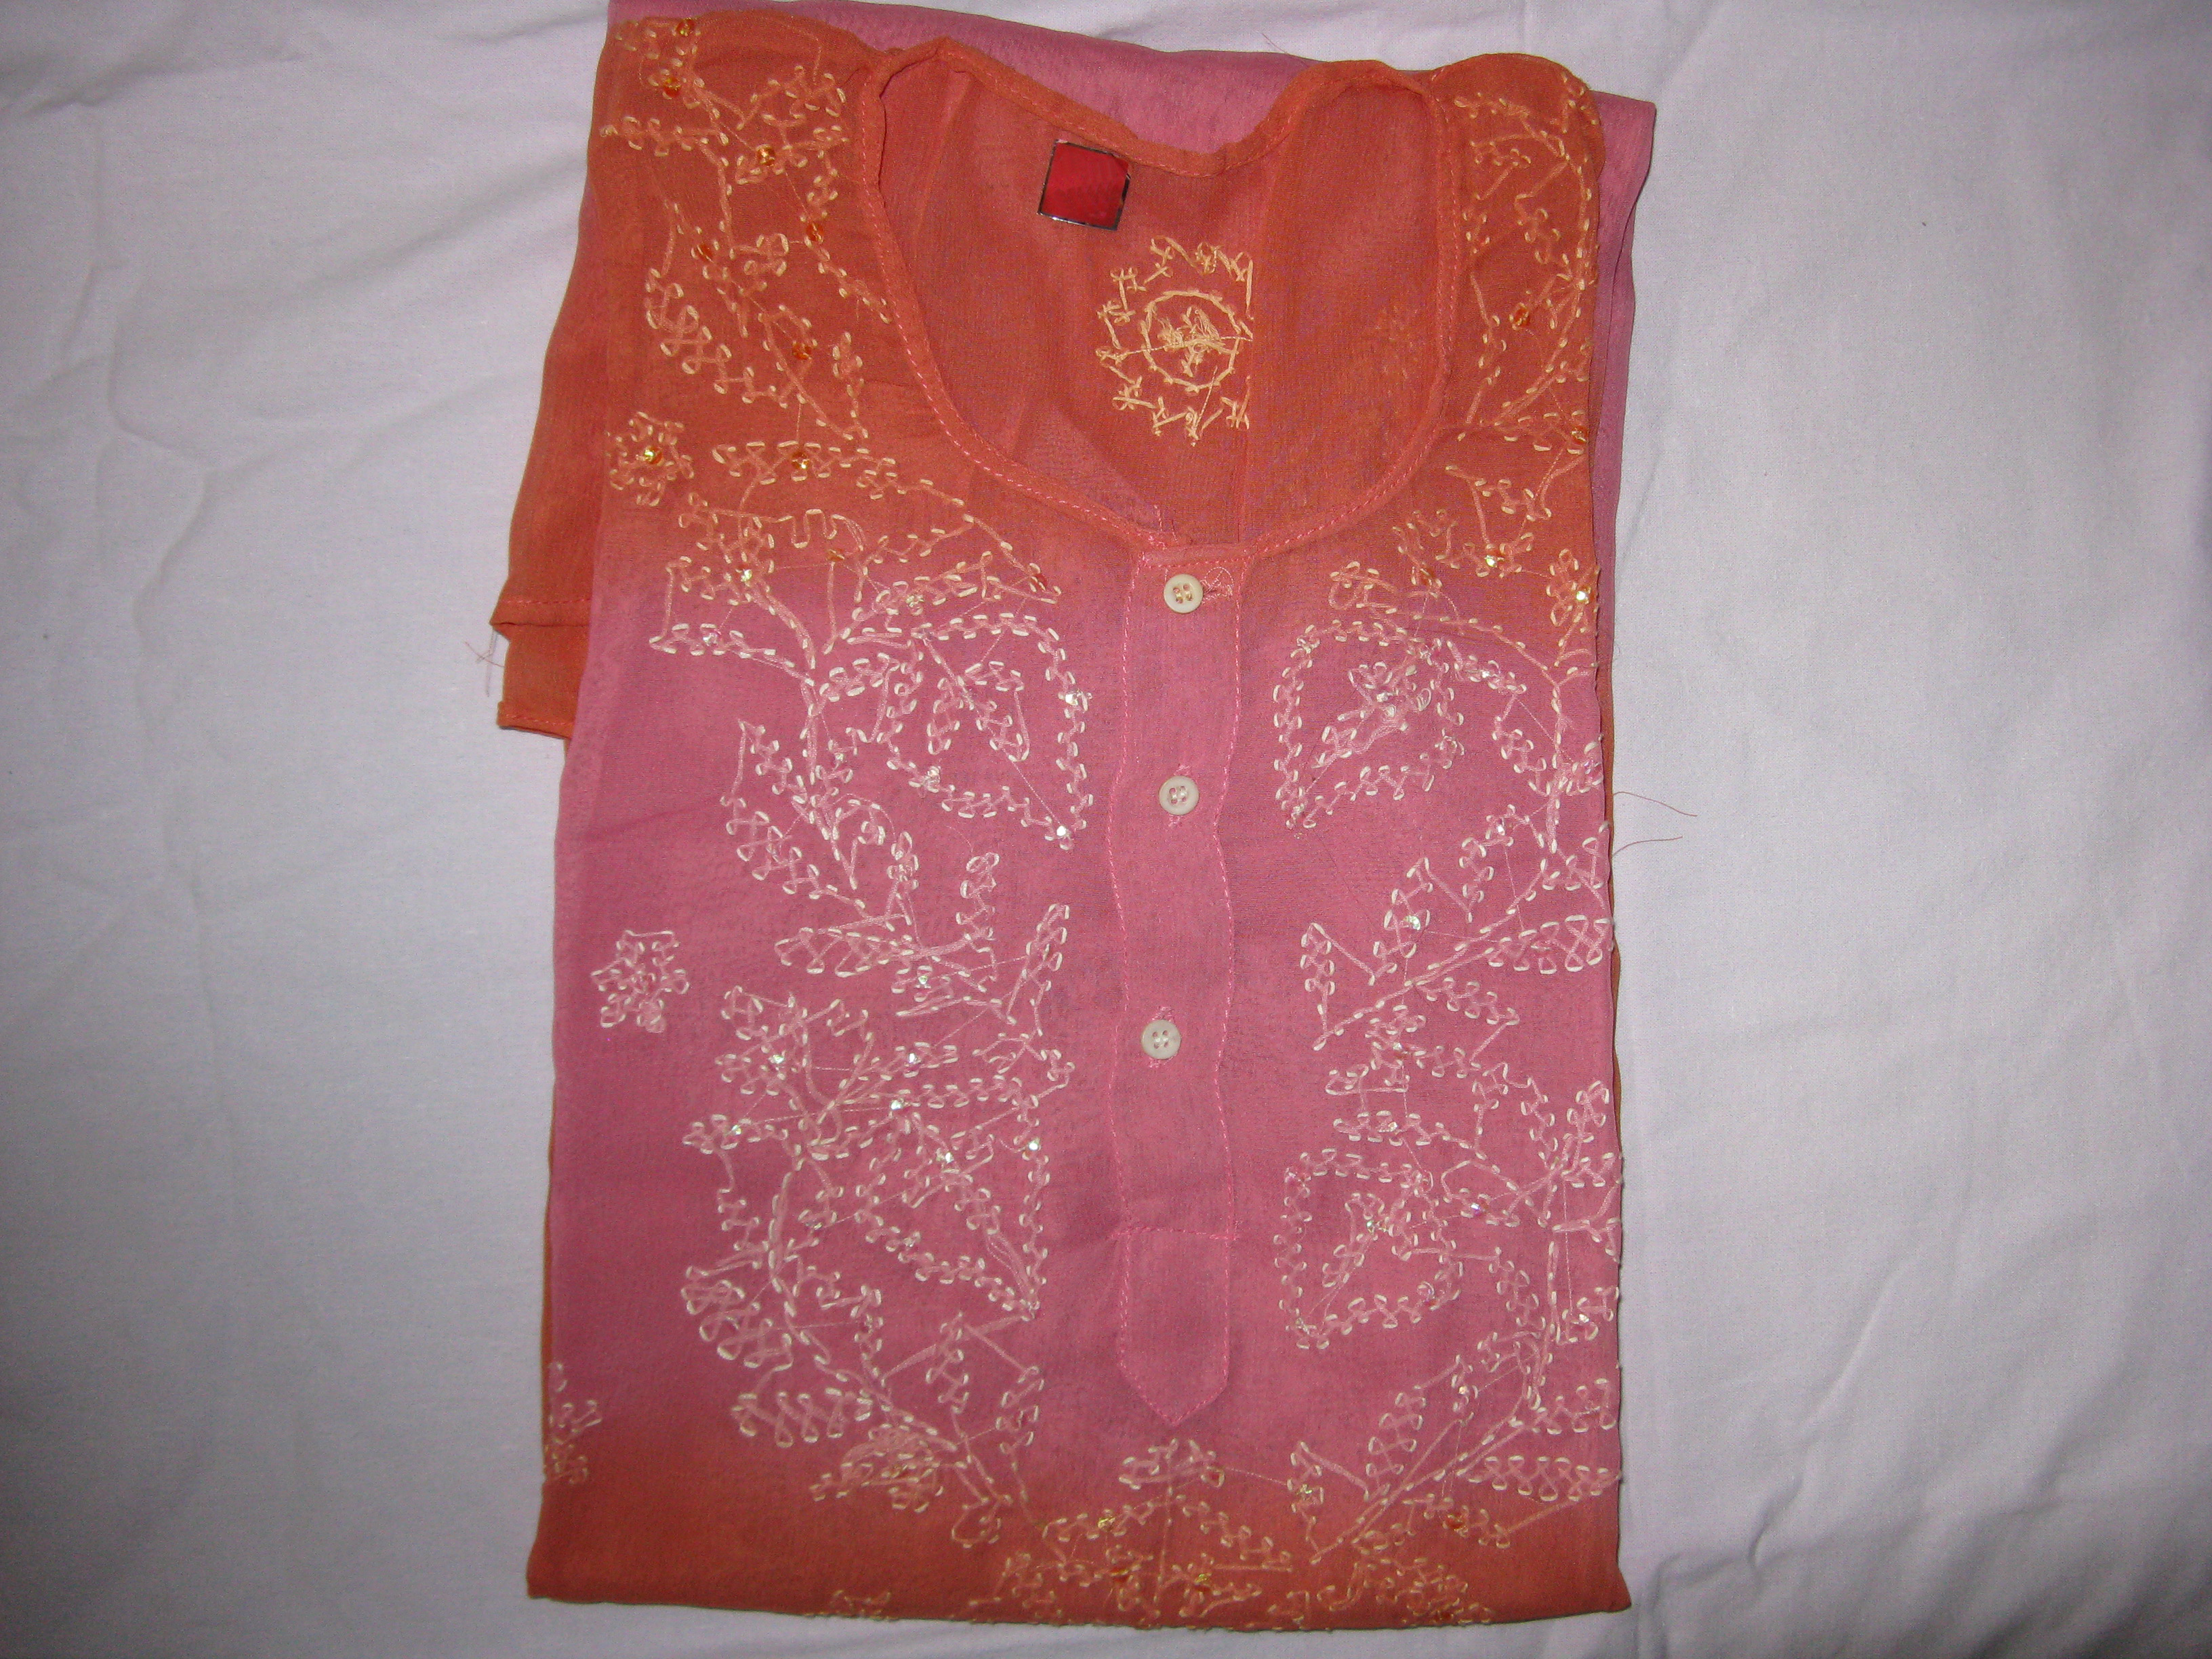 INDIAN TUNICA WITH FULL EMBROIDERY IN POLYESTER -|| TIE & DYE || GUARANTEED LOW PRICE|| DO NOT MISS THIS CHANCE ll FREE HOME DELIVERY(POST NORD)|| DISCOUNT 35%llArt. No. 17/36105748